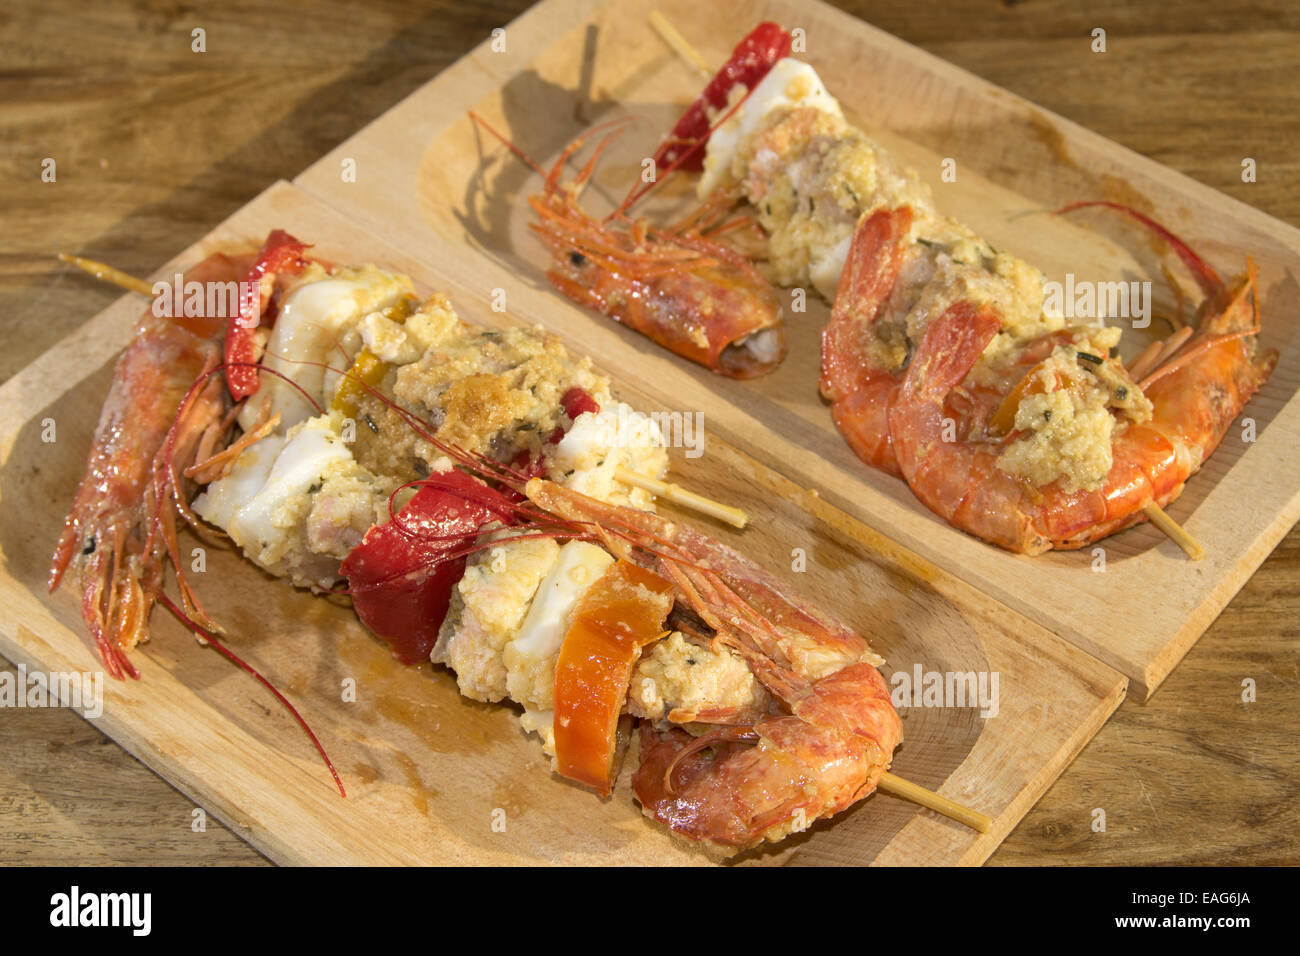 kebab of fish with sauce of citrus fruit Stock Photo